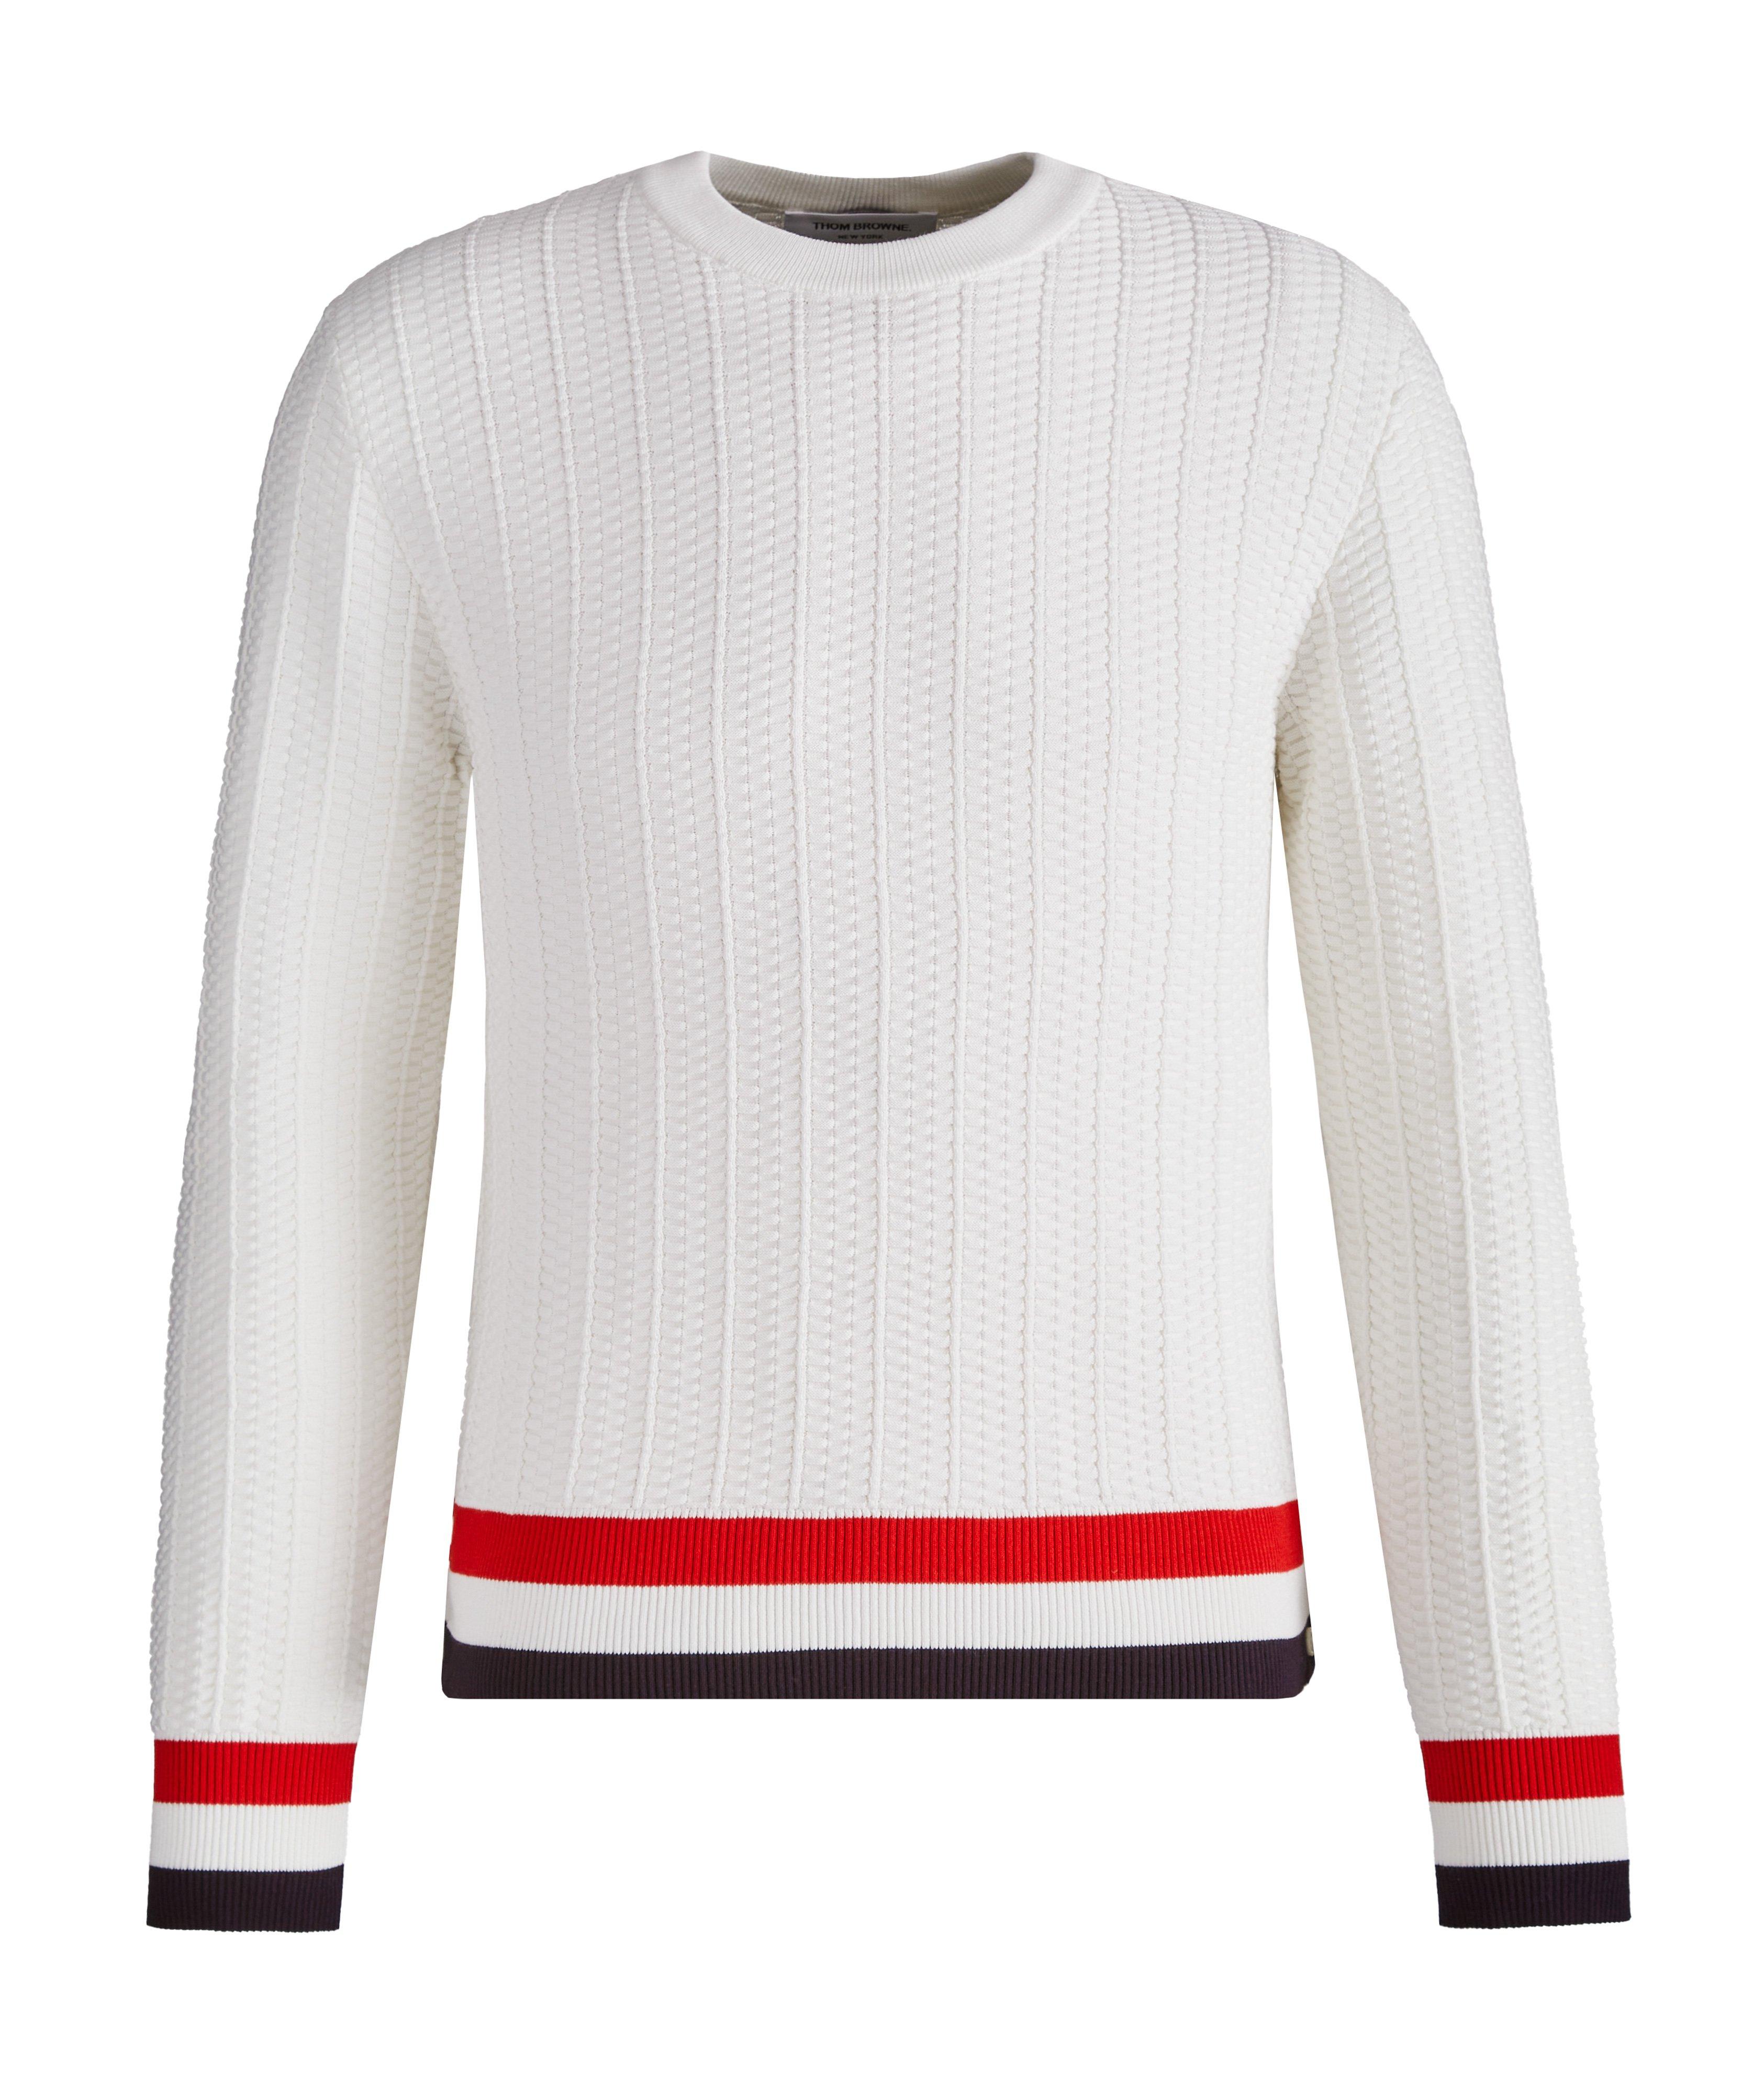 Striped Textured Cotton Knit Sweater image 0